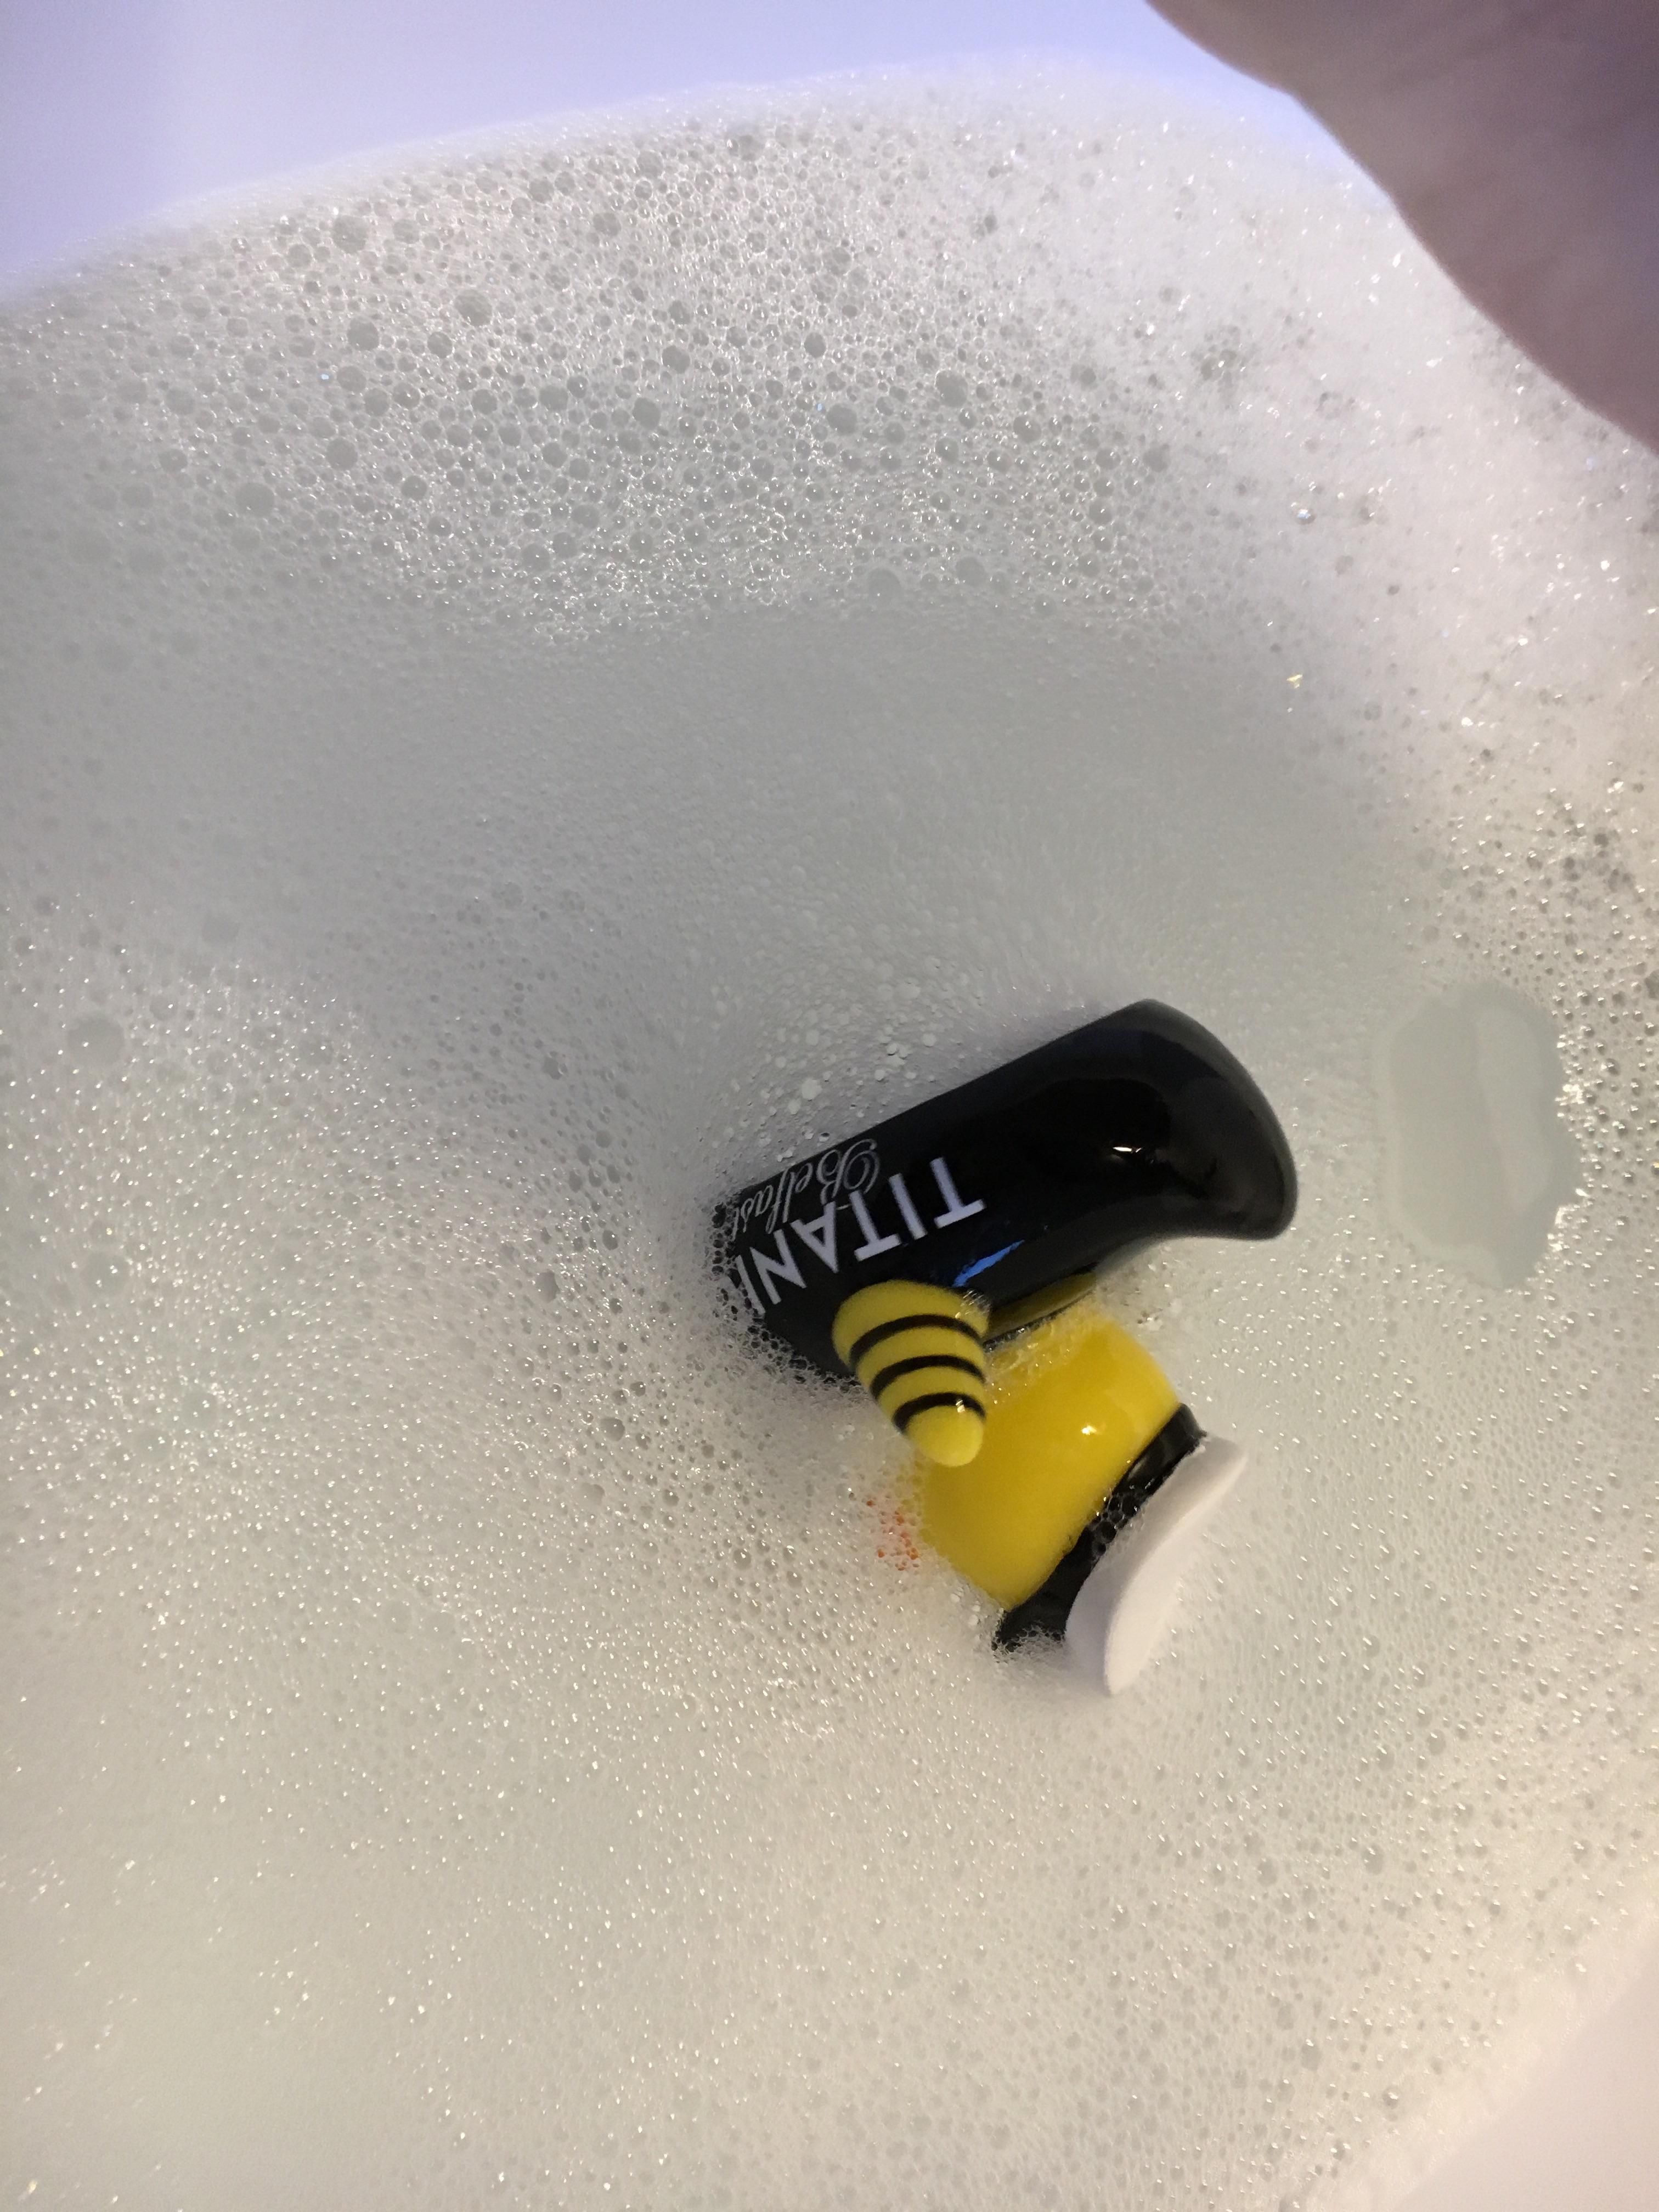 The rubber ducky souvenir from the titanic museum can’t float upright.